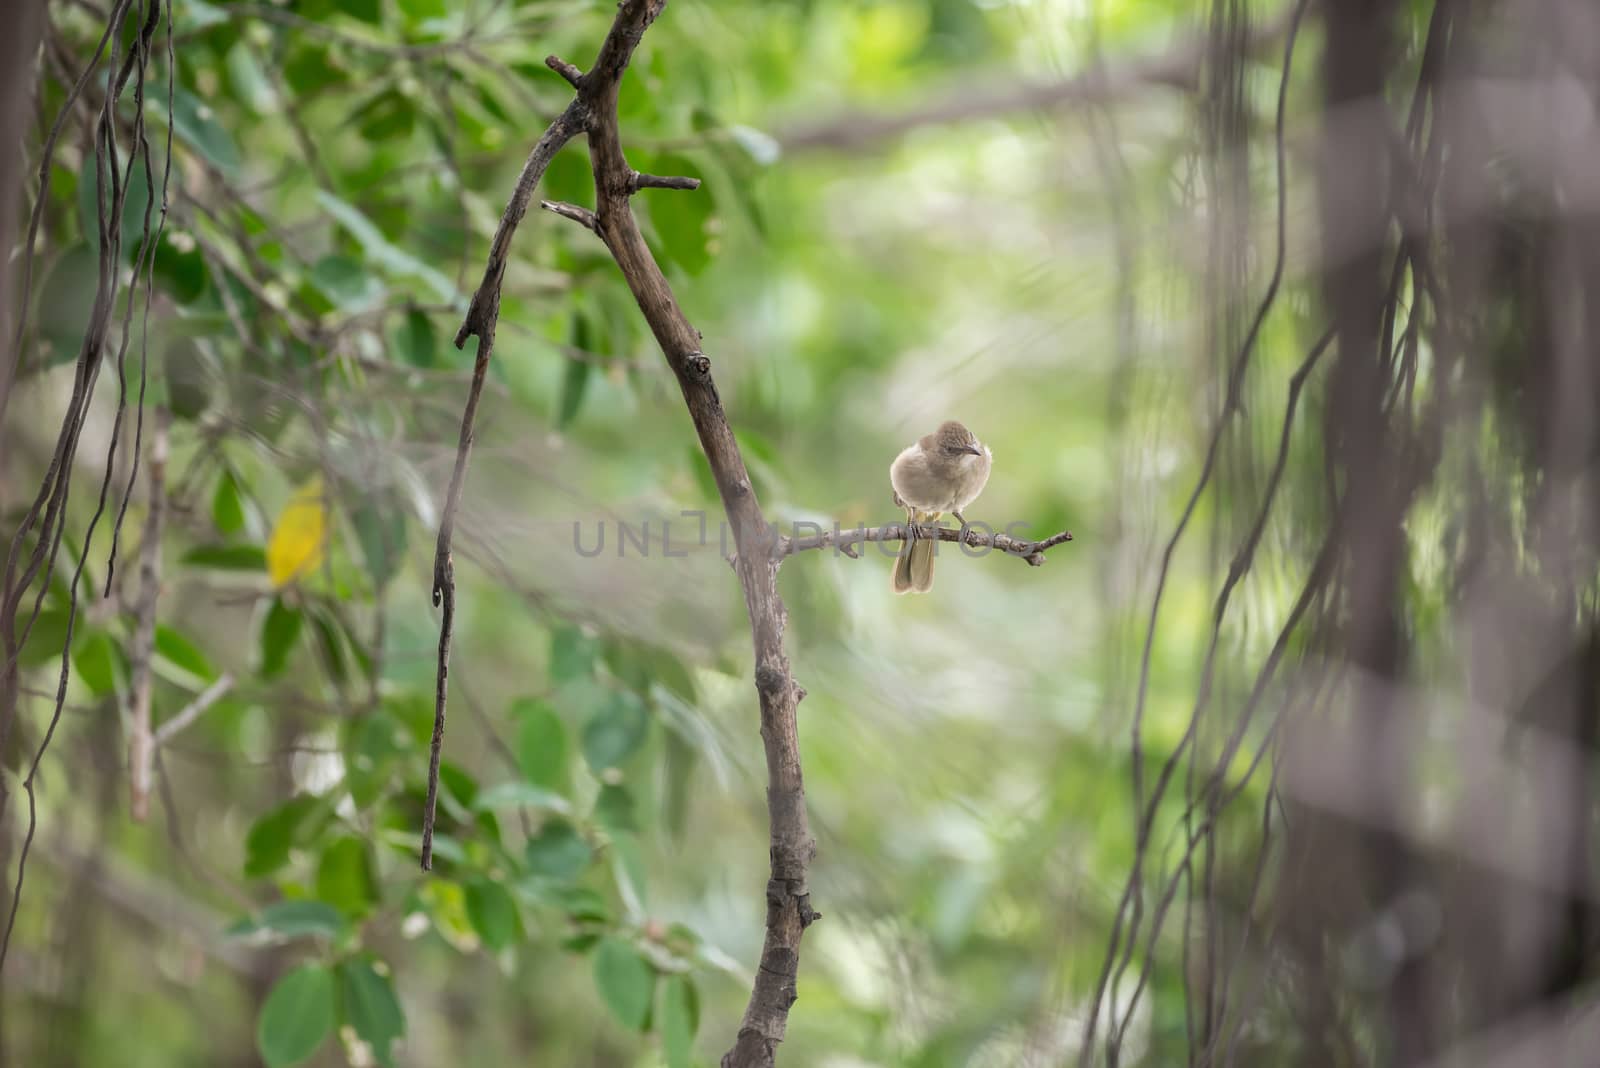 Bird (Streak-eared bulbul, Pycnonotus blanfordi) brown color perched on a tree in a nature wild